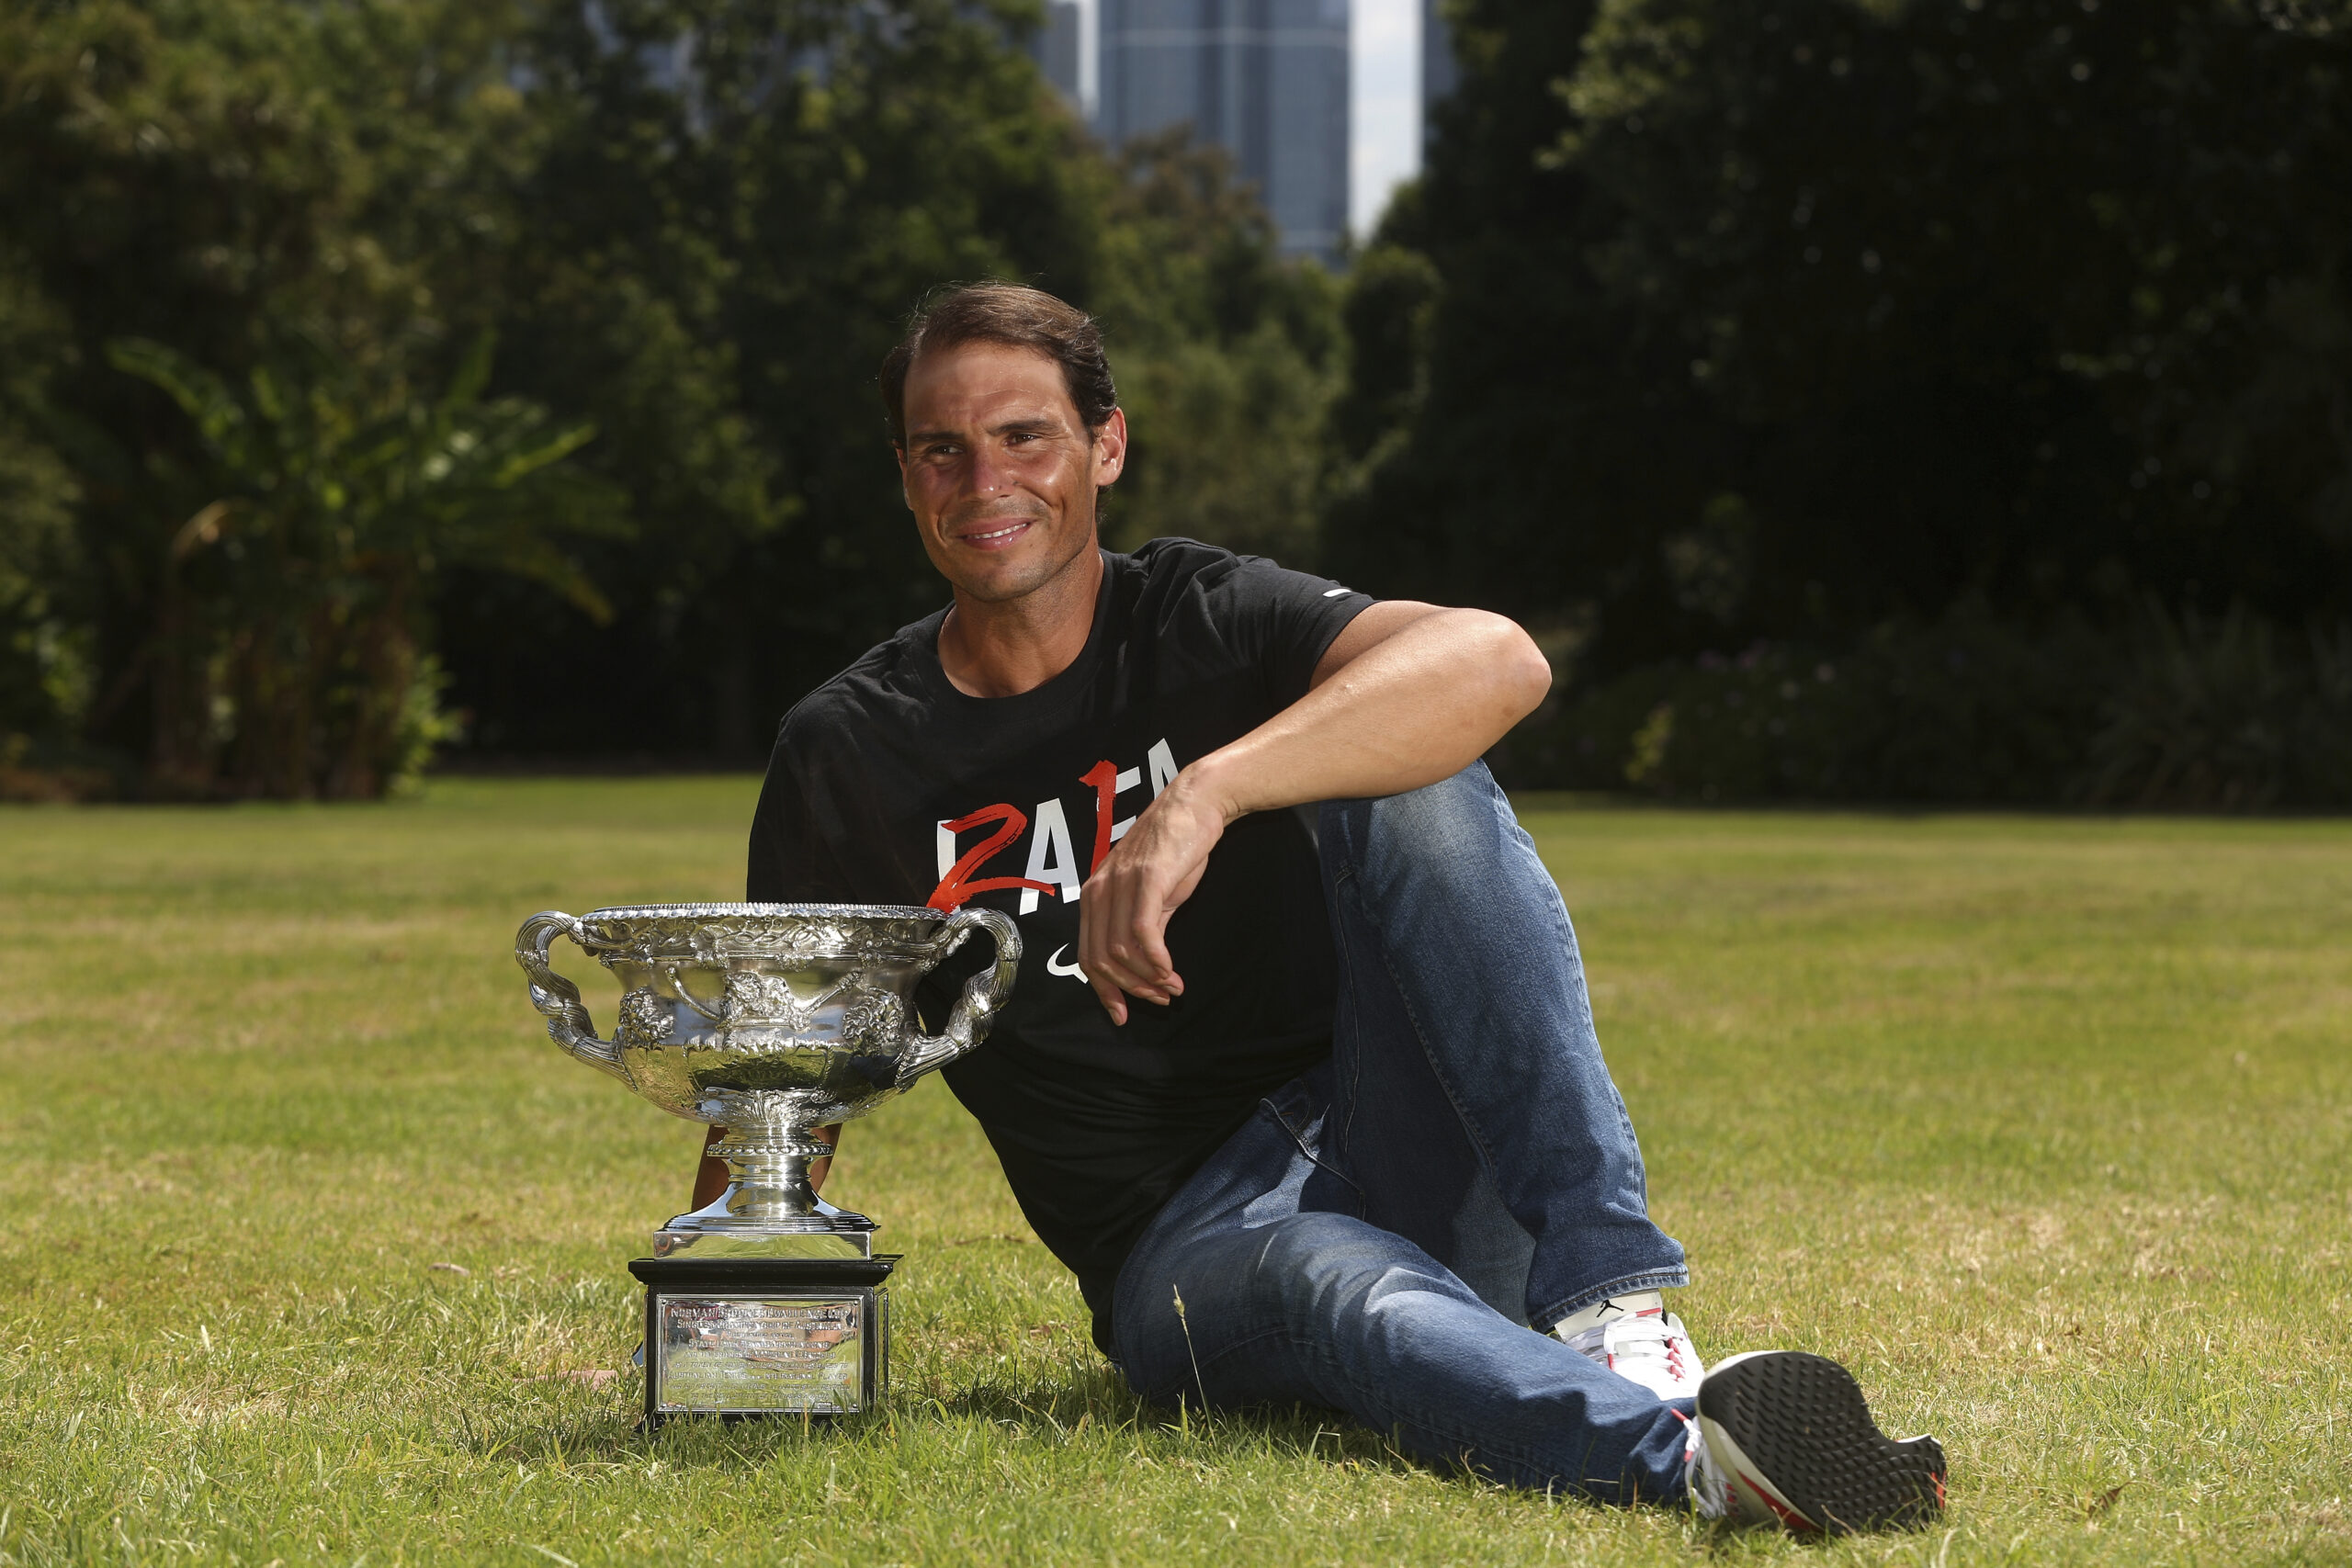 Men's singles champion Rafael Nadal of Spain poses for a photo with his trophy at Government House after the Australian Open in Melbourne, Australia, Monday, Jan. 31, 2022. (AP Photo/Hamish Blair)